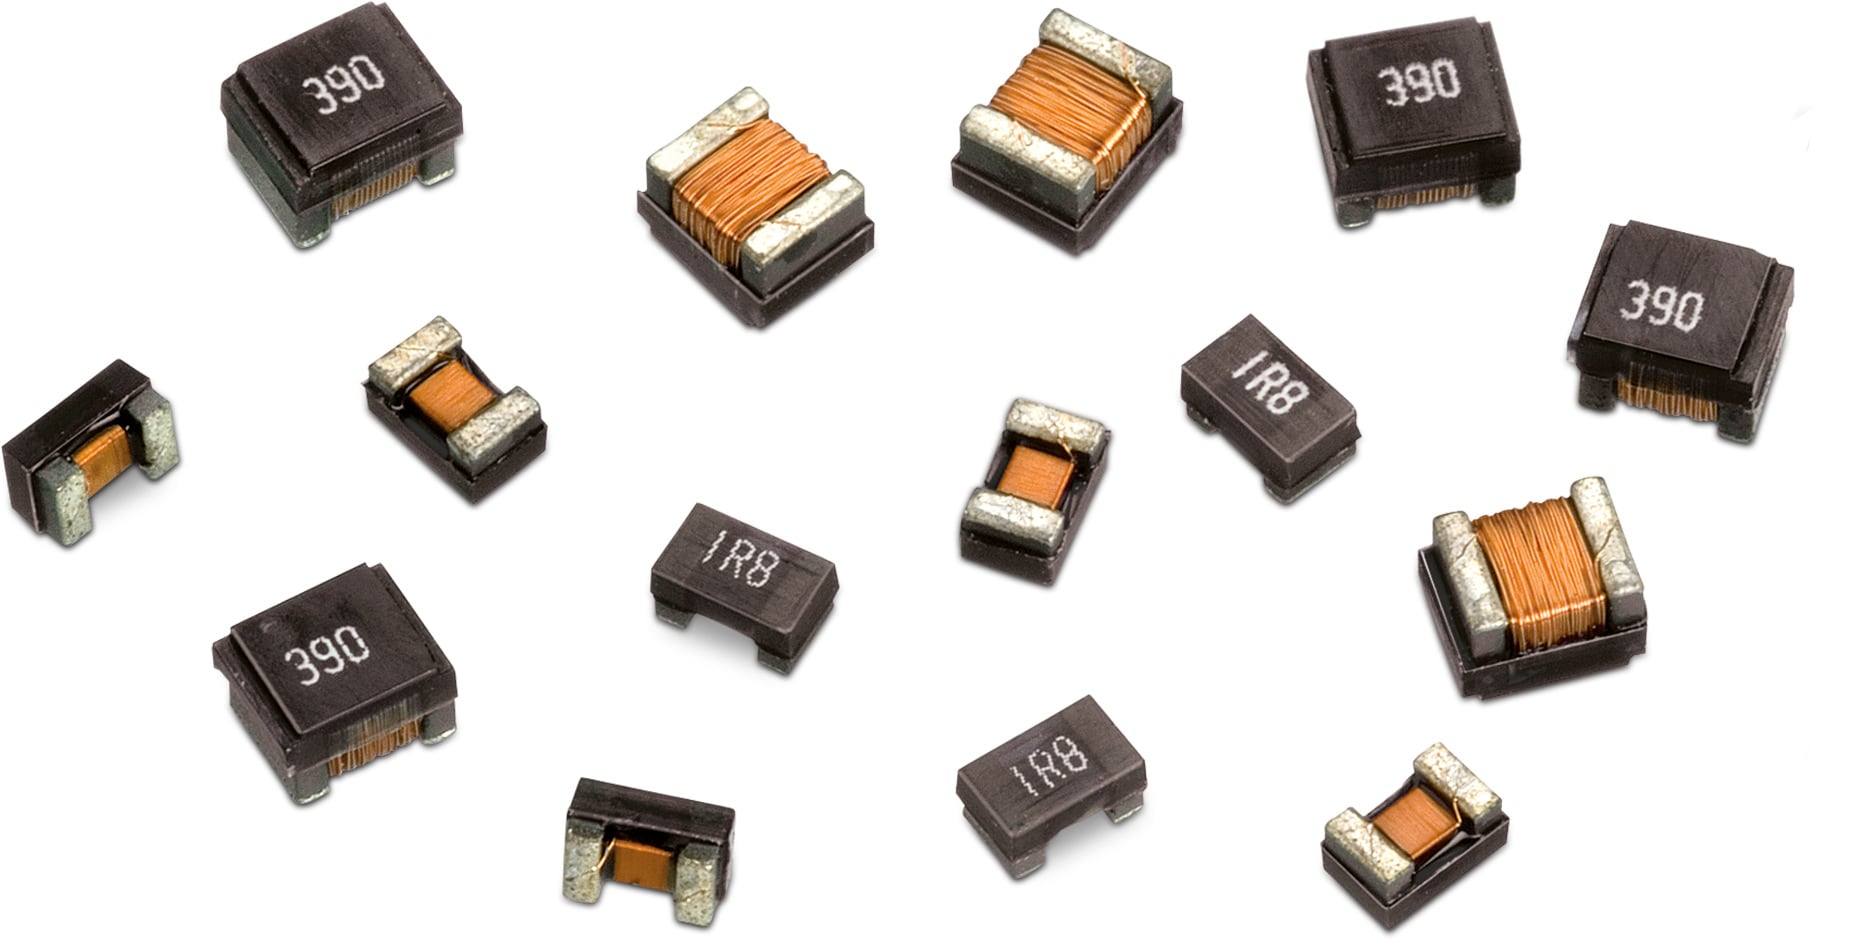 smd-components-commonly-used-smd-parts-and-their-identification